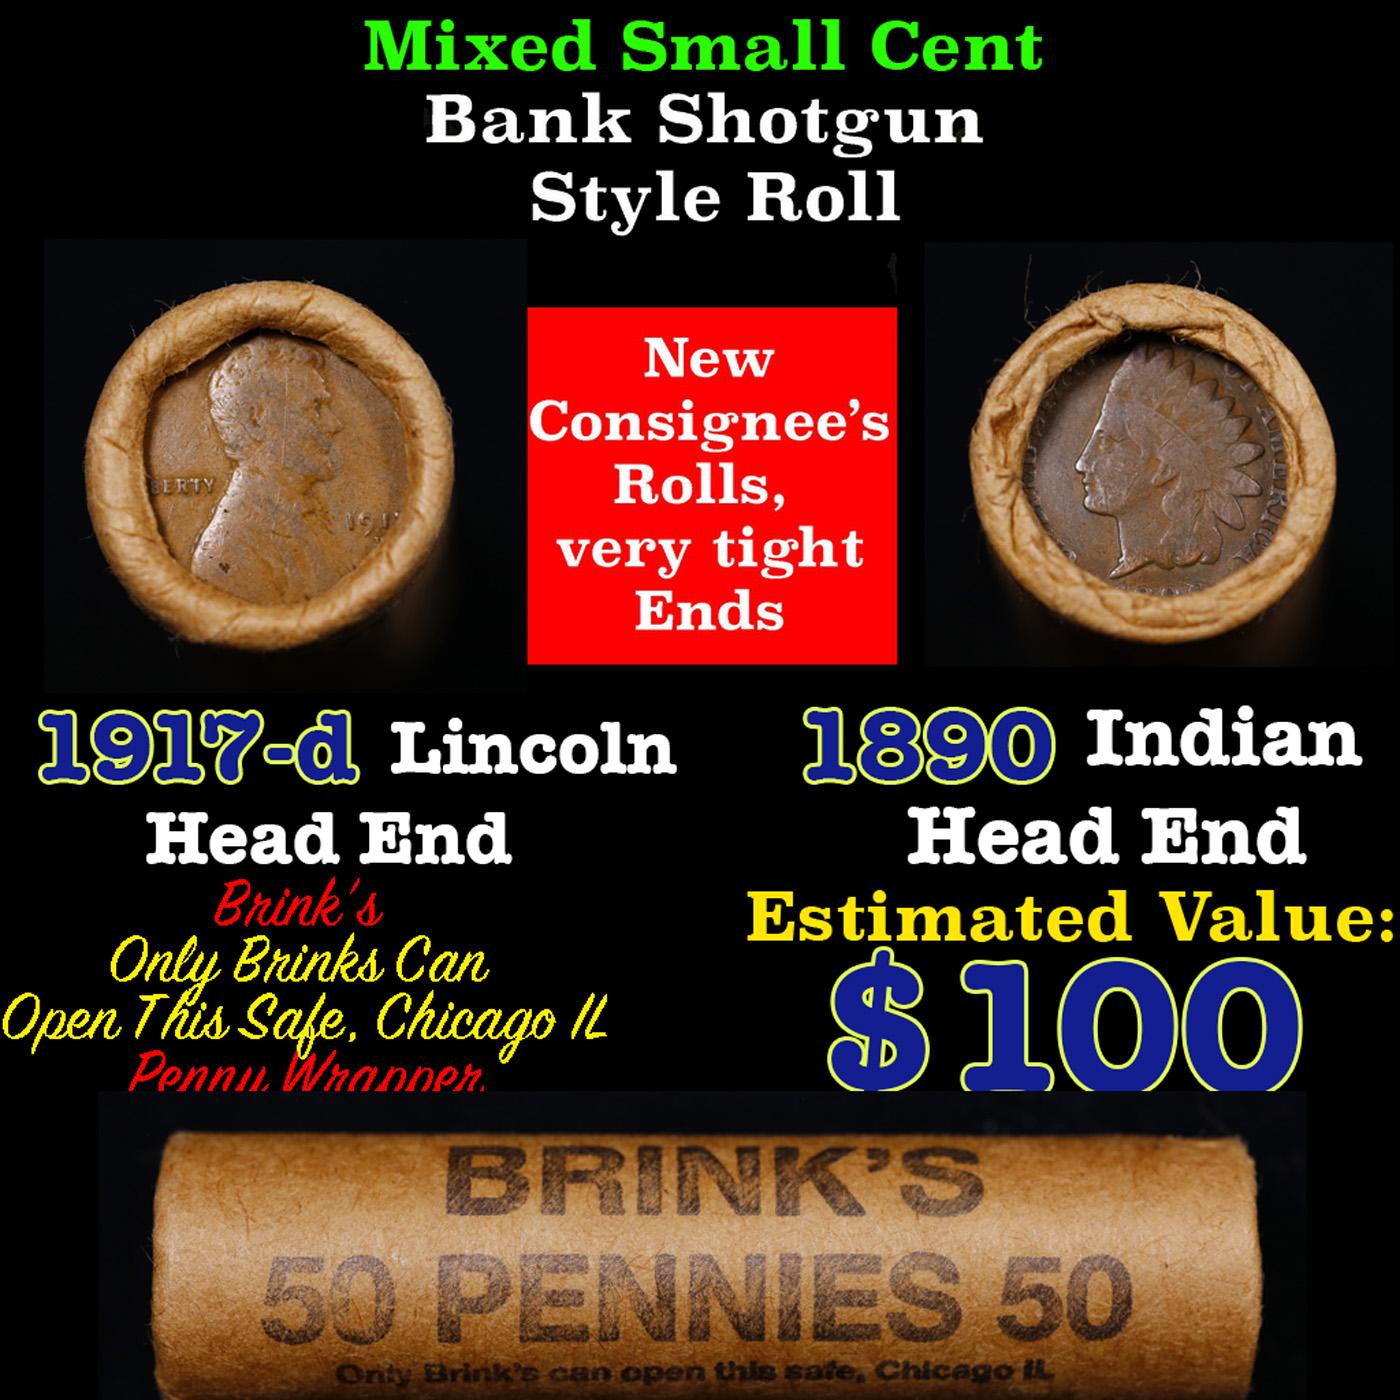 Mixed small cents 1c orig shotgun roll, 1917-d Wheat Cent, 1890 Indian Cent other end, Brinks Wrappe